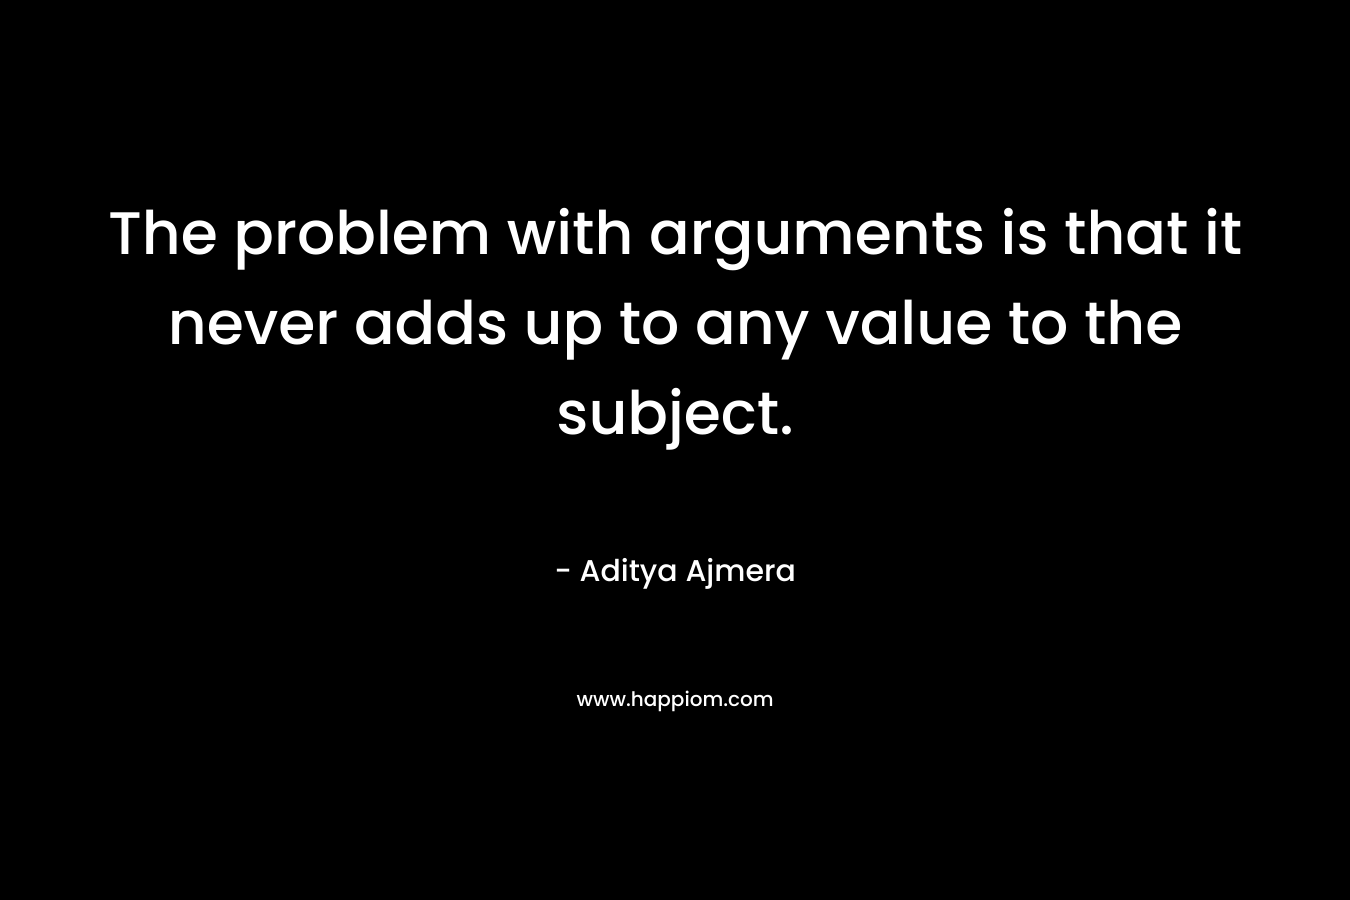 The problem with arguments is that it never adds up to any value to the subject. – Aditya Ajmera